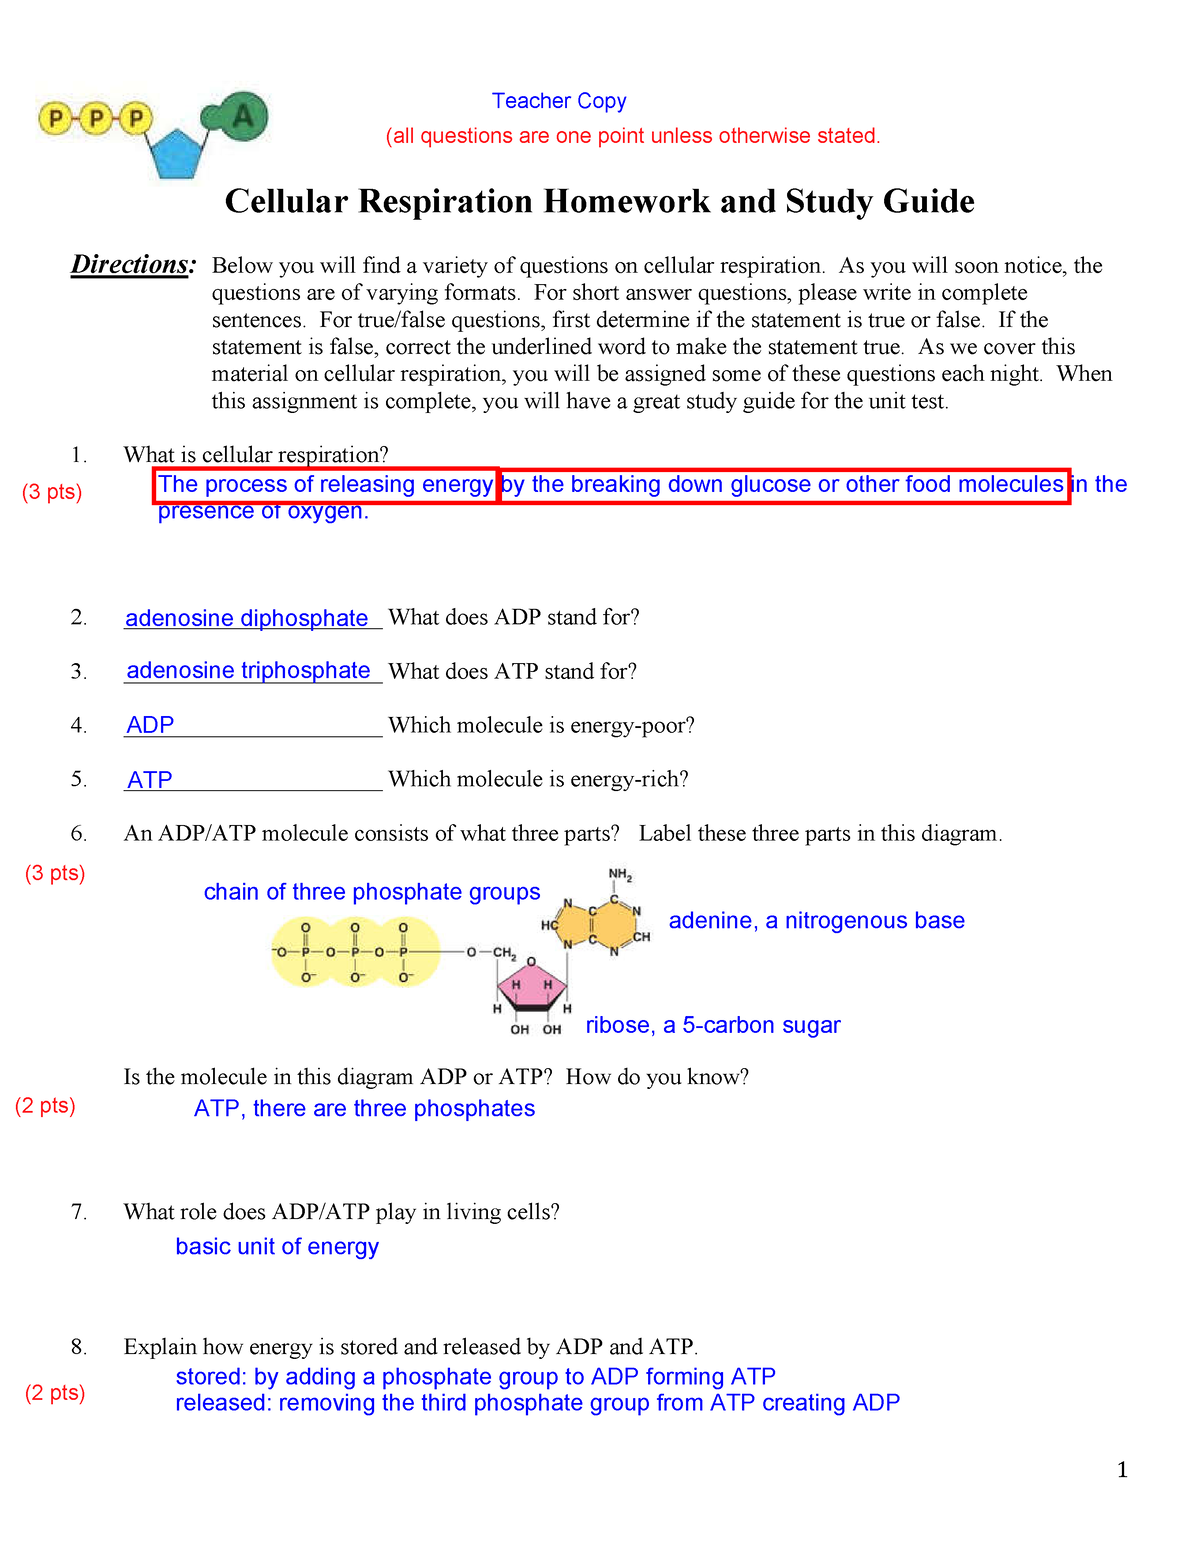 cellular respiration homework and study guide answers